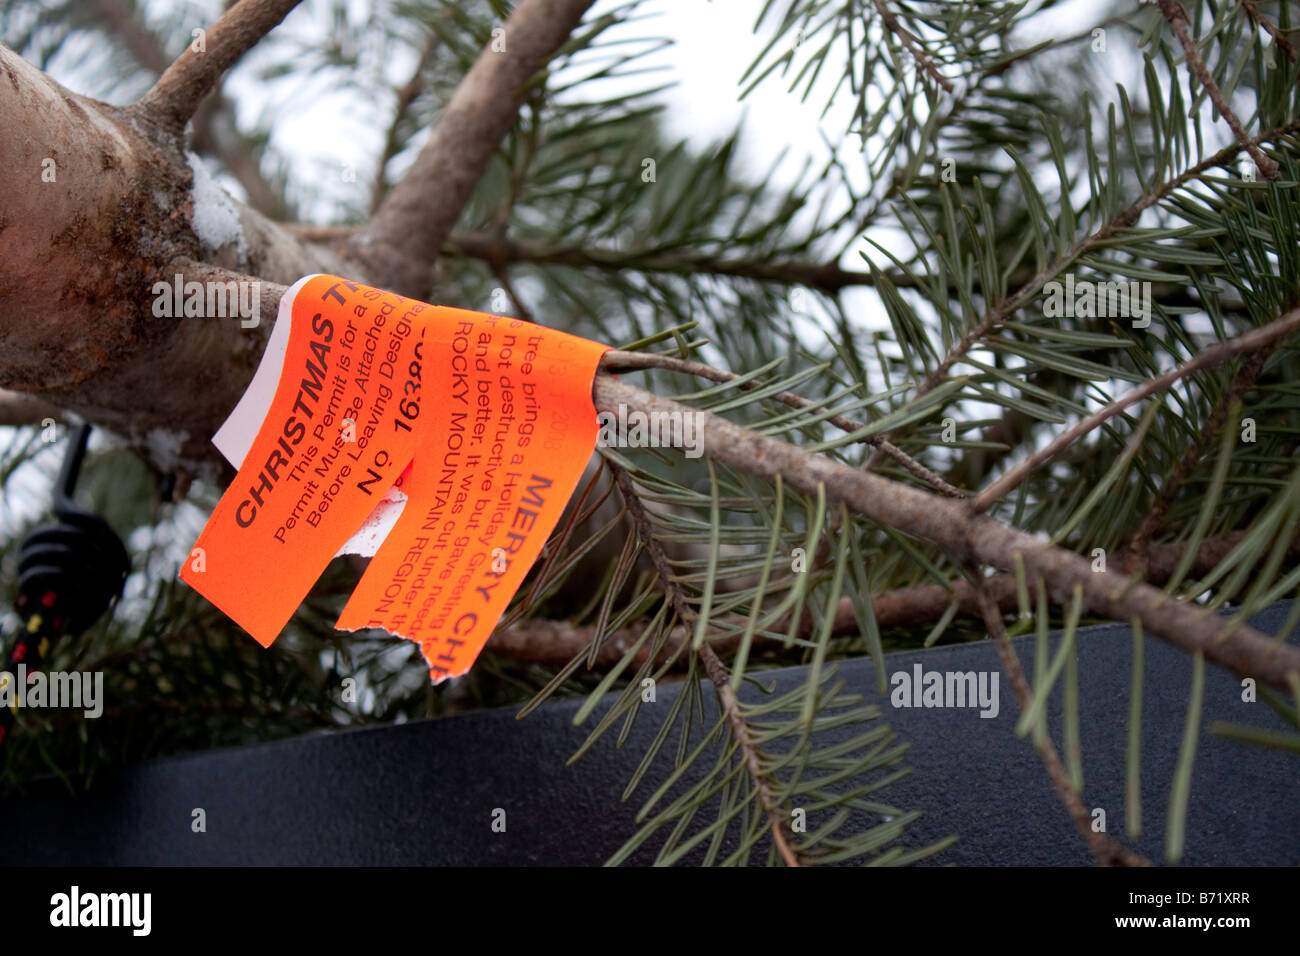 A fresh cut Christmas tree with a forest service tag Stock Photo